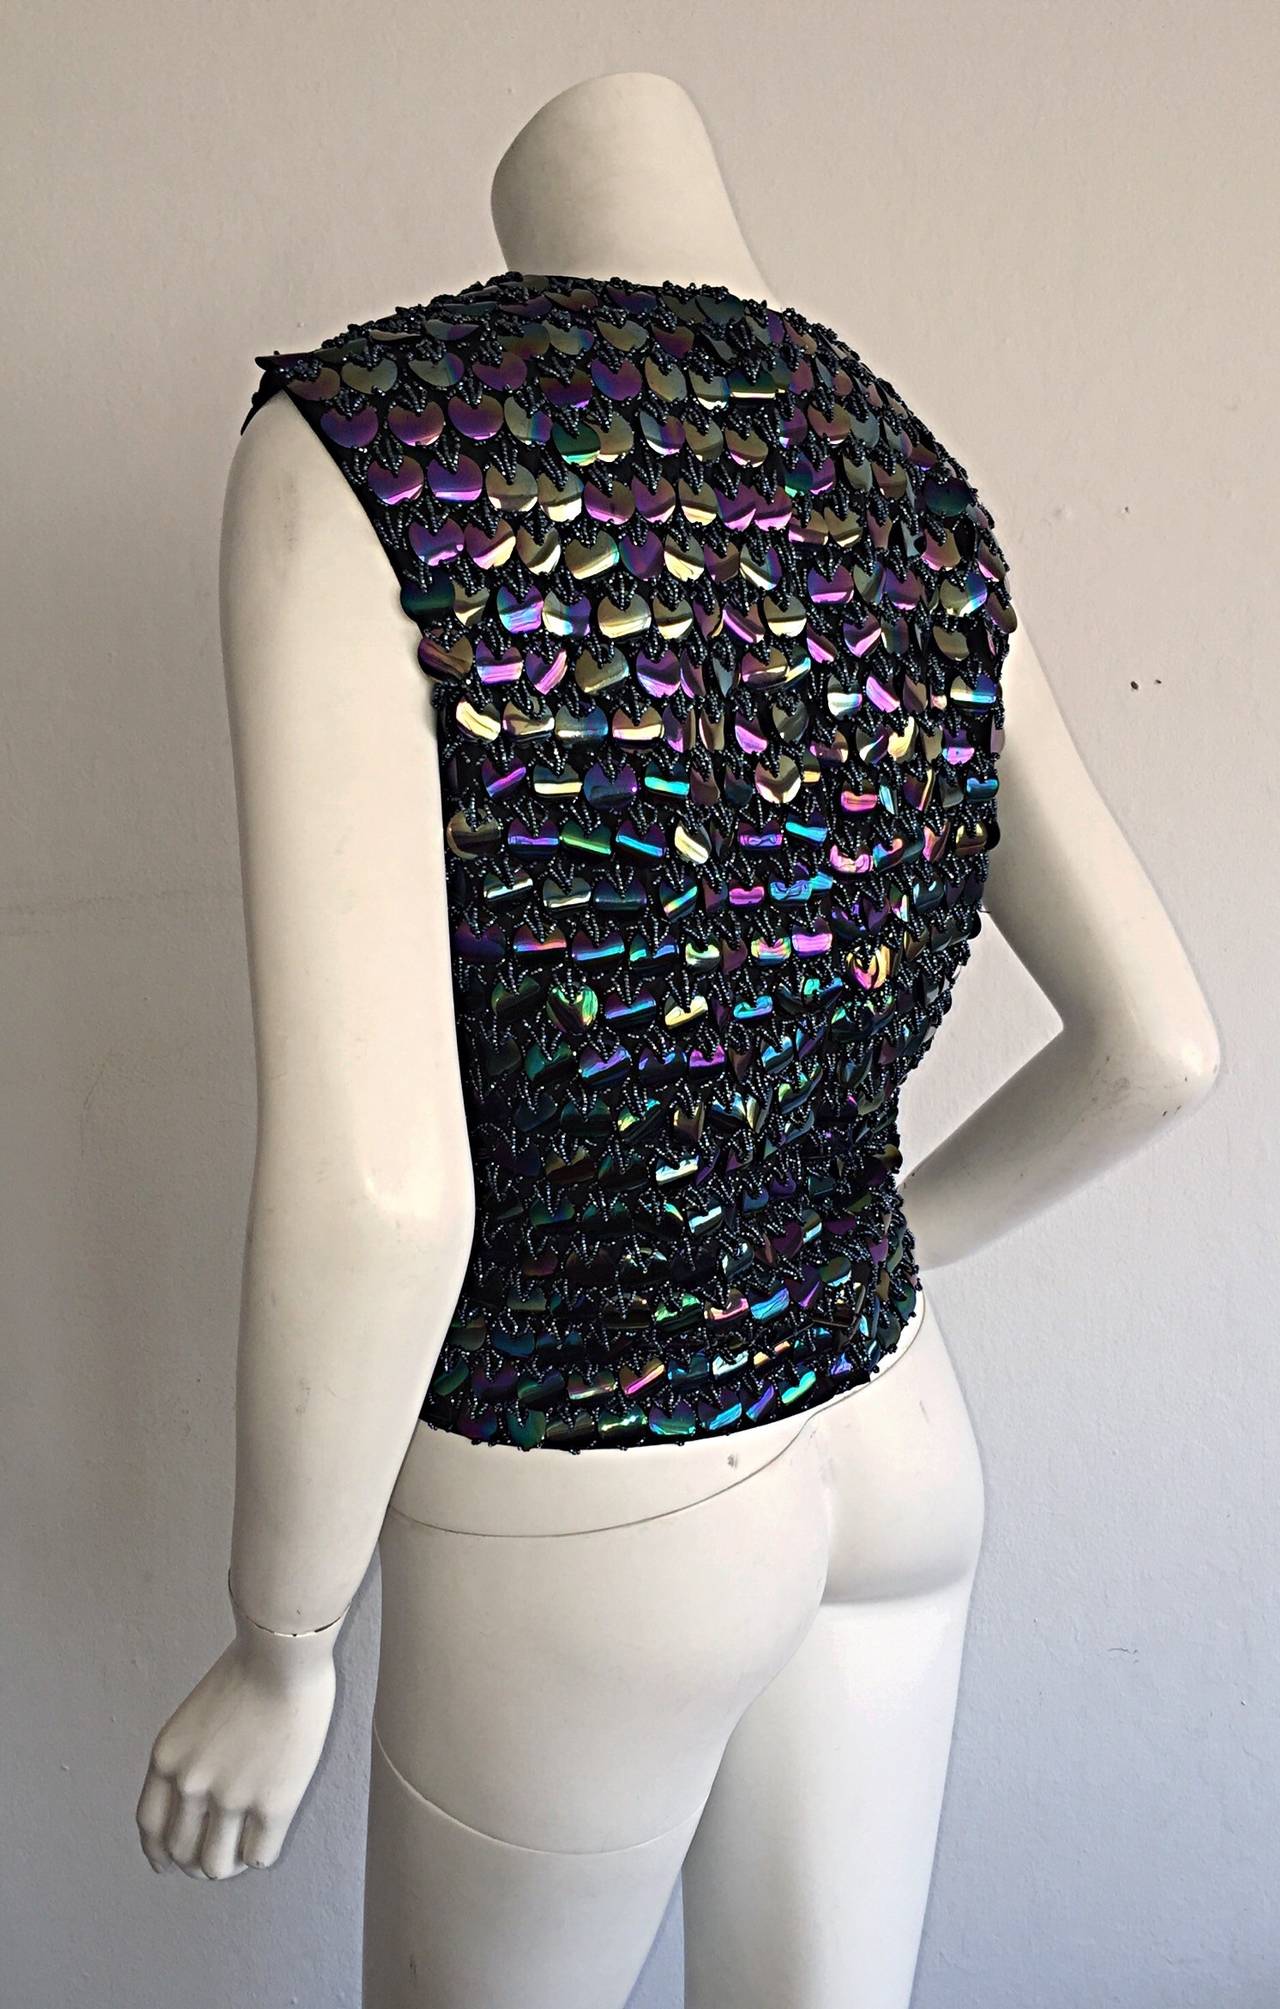 Fabulous 1950s Gene Shelly's Fully Beaded Iridescent Paillettes Silk Blouse Top In Excellent Condition For Sale In San Diego, CA